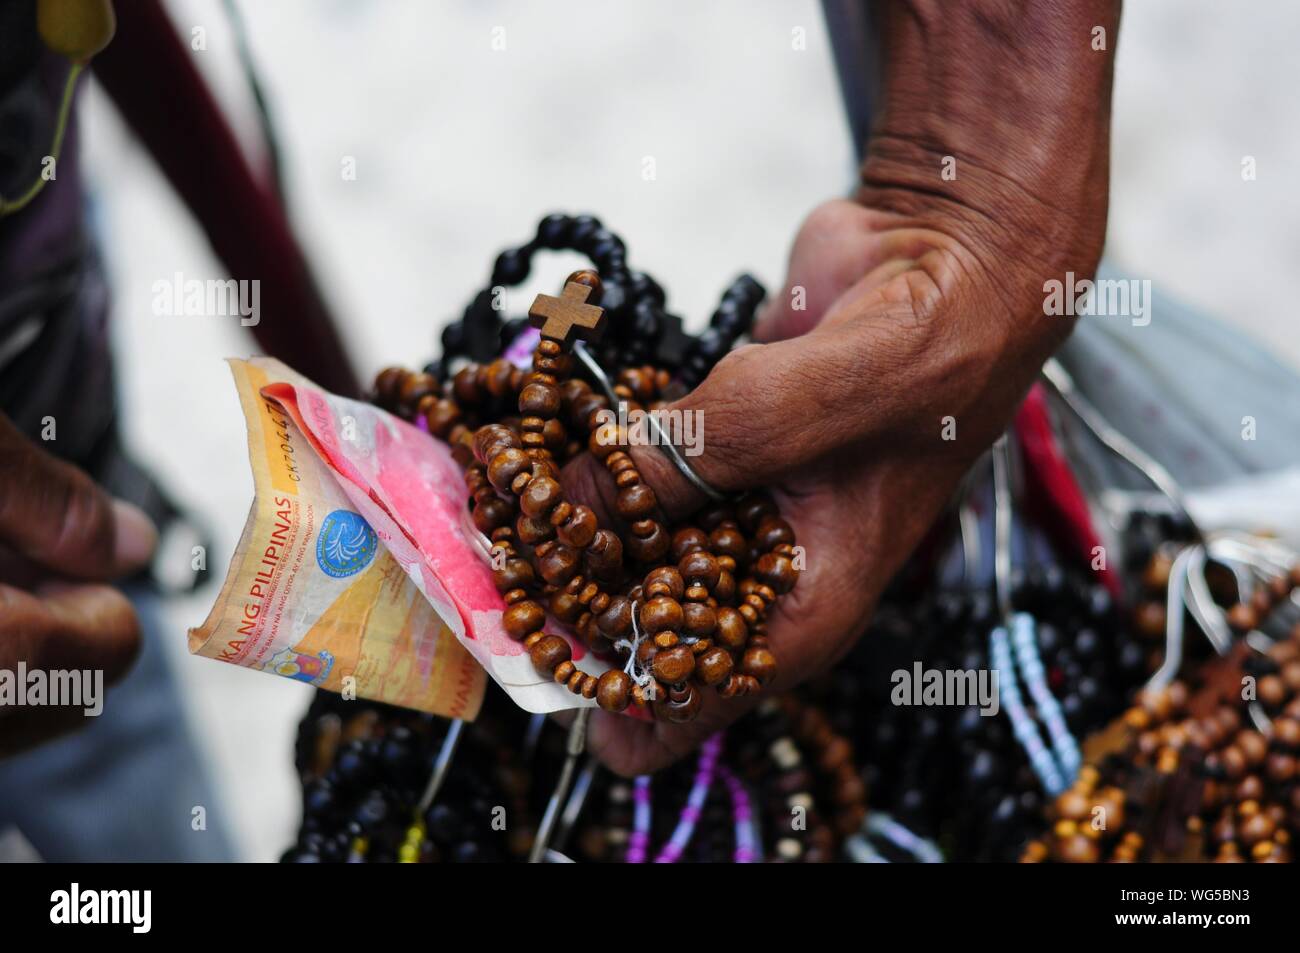 Close-up Of Vendor With Money And Rosaries Stock Photo